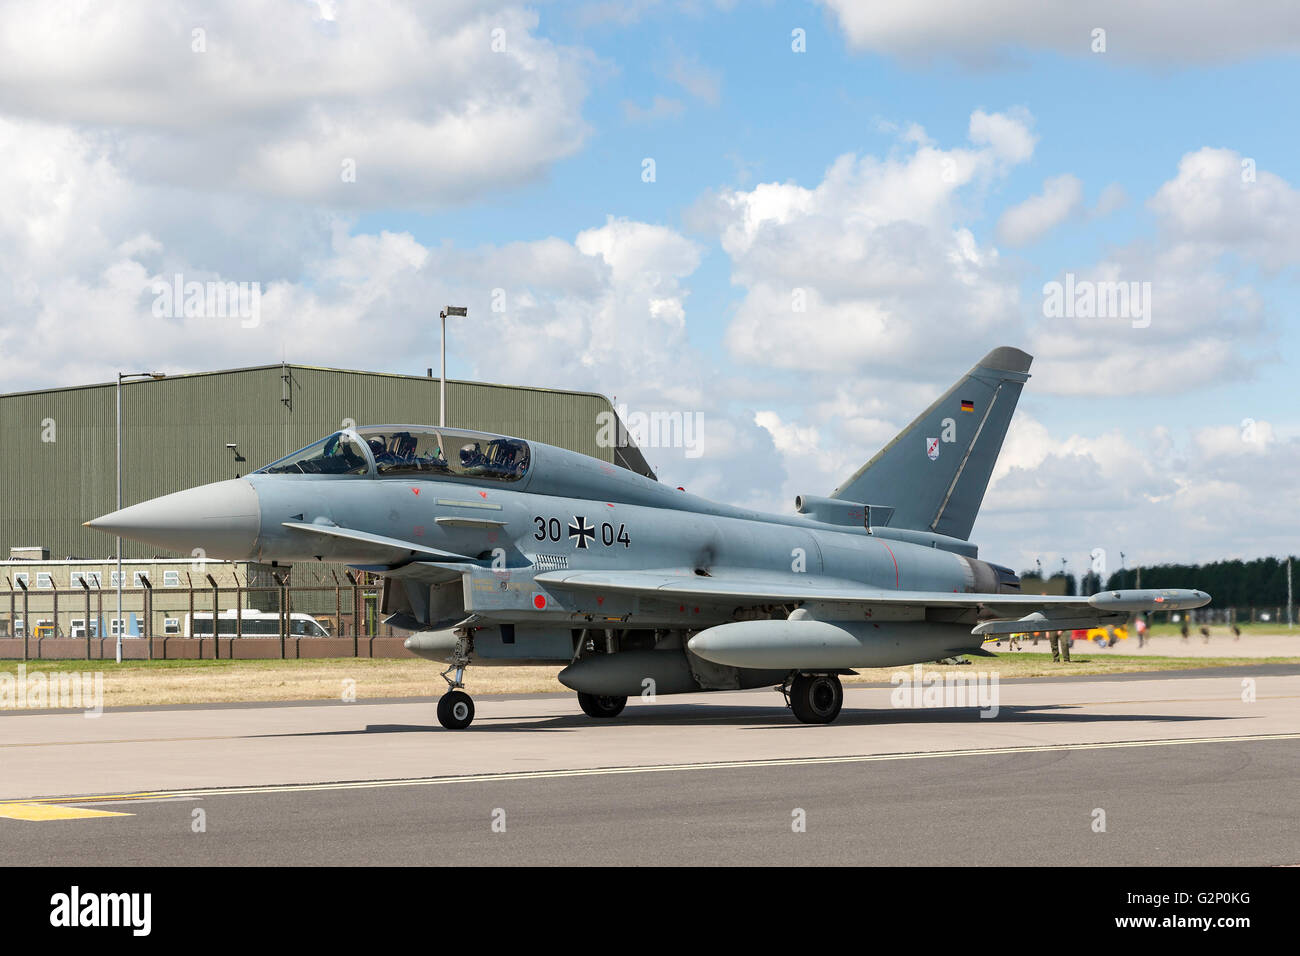 German Air Force (Luftwaffe) Eurofighter EF-2000 Typhoon multi-role fighter aircraft. Stock Photo